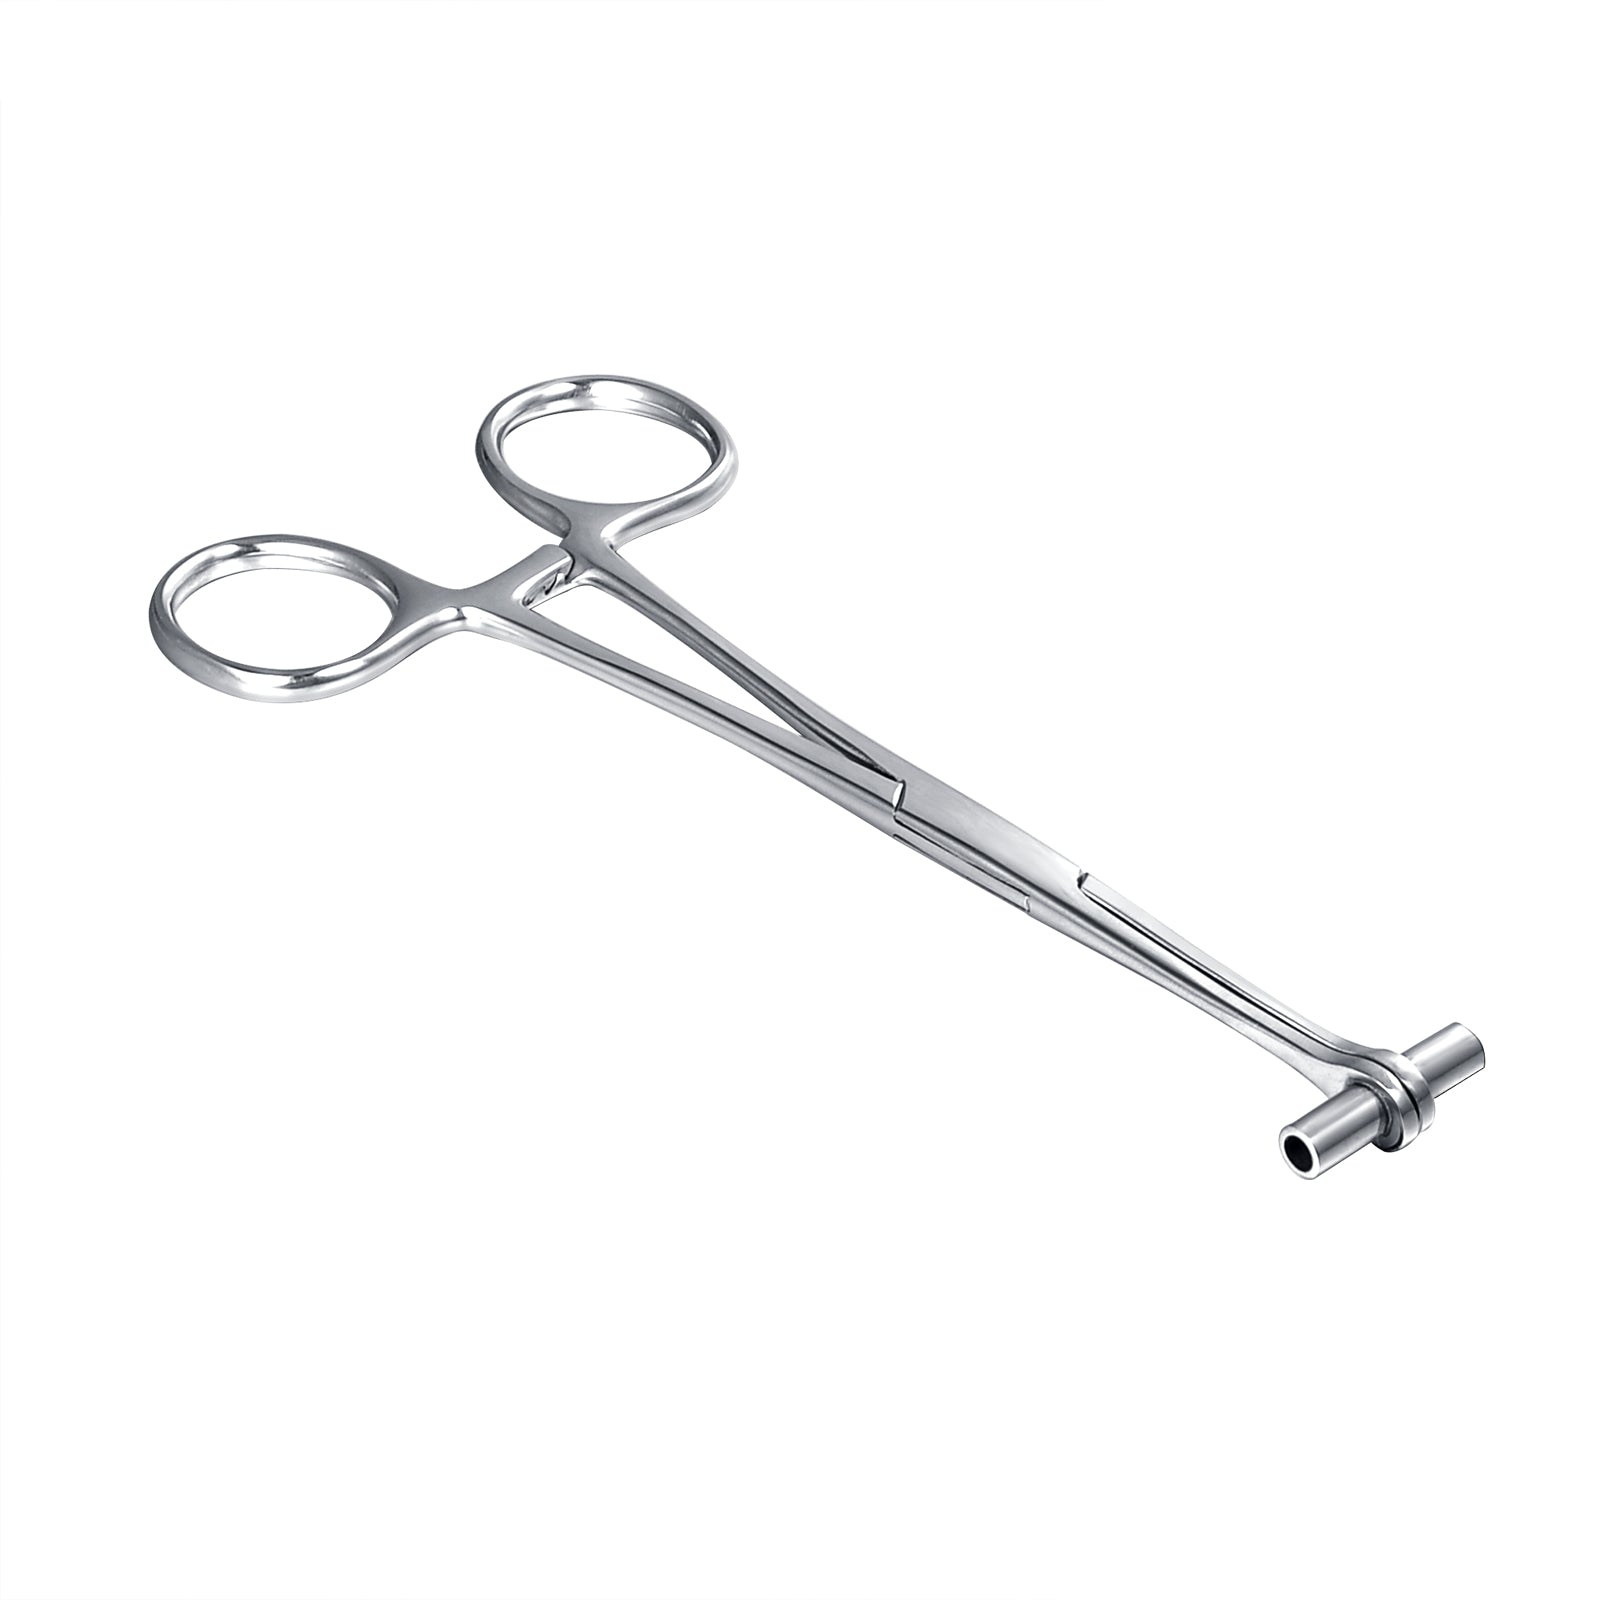 Septum Forceps Clamp Pliers for Nose Septum Piercing Forceps 6' with Needles 316L Surgical Stainless Steel Body Piercing Tools